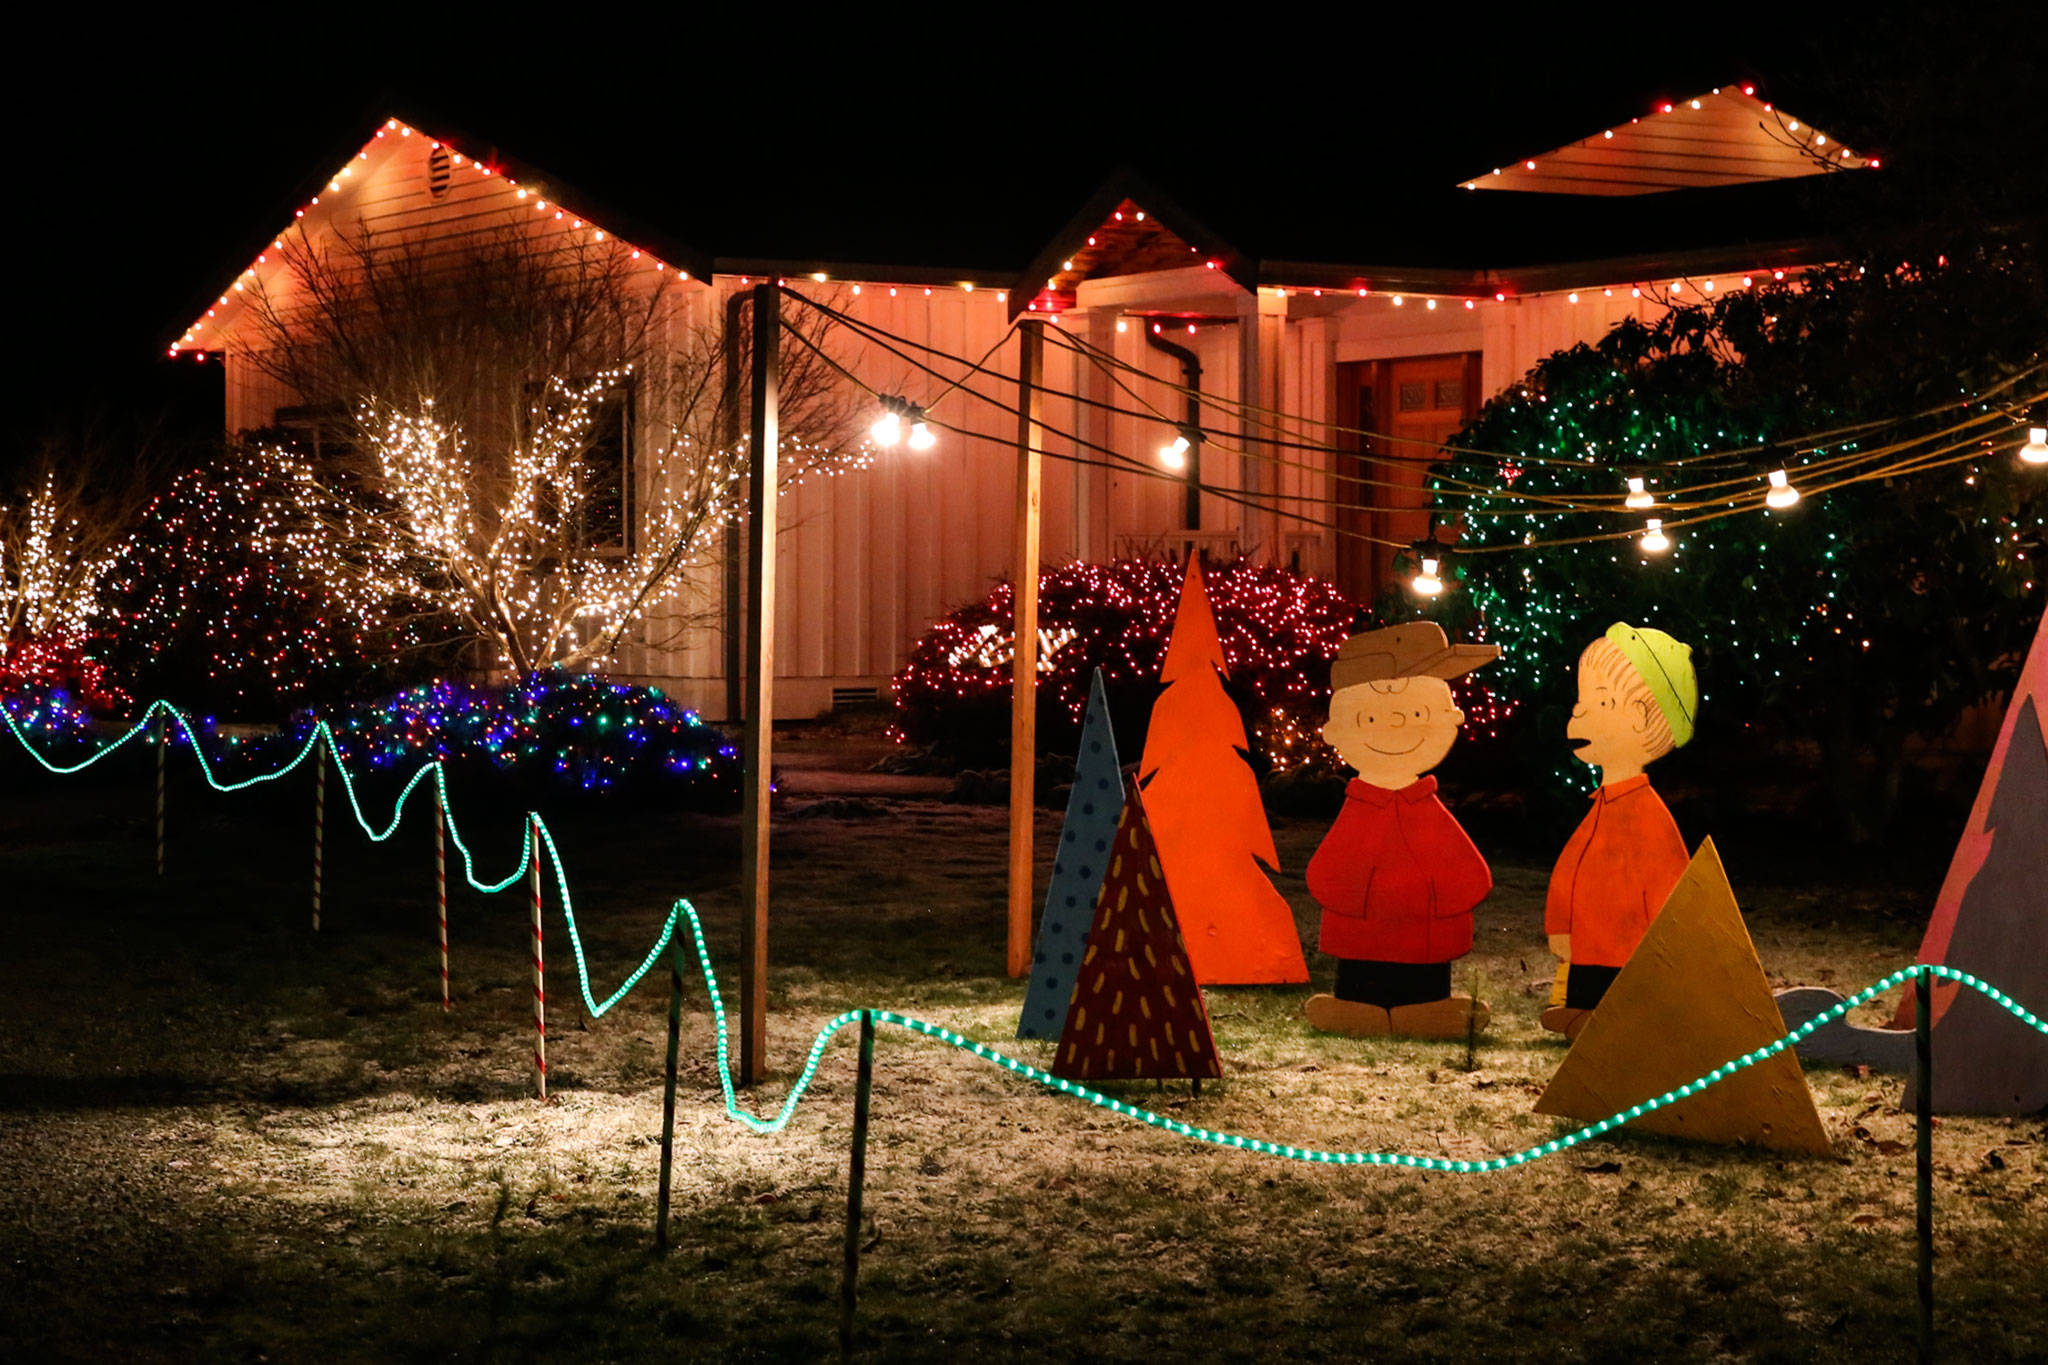 Jerry Beck and his family decorate their Clinton home with more than 30,000 lights and handmade decorations every year. More than 1,400 people came to see it in 2017. (Kevin Clark / The Herald)